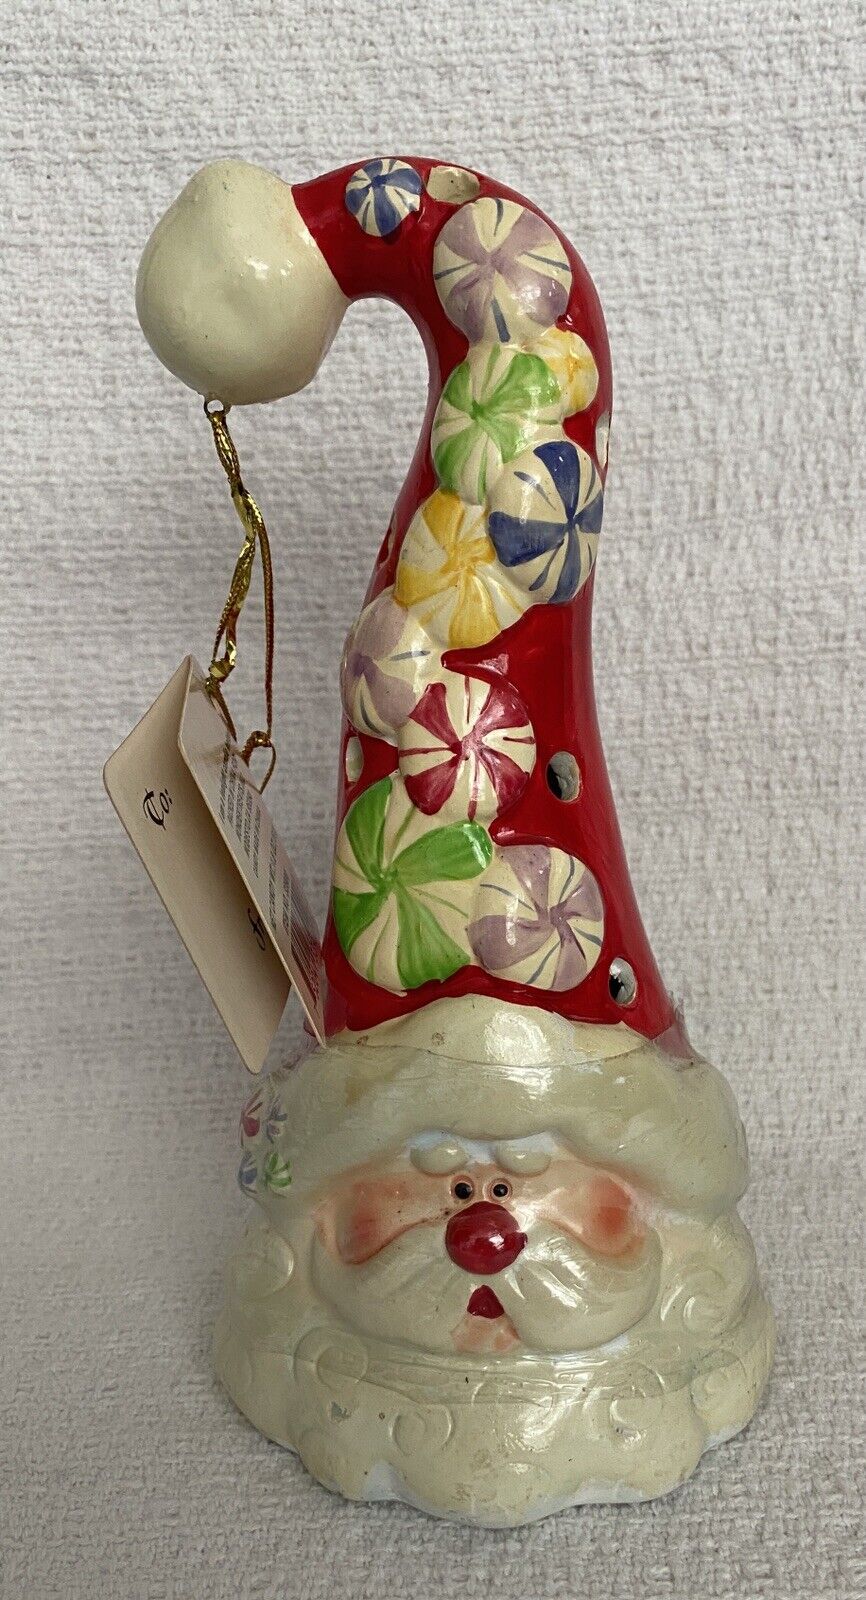 NOS Santa Tealight Candle Holder with Decorative Peppermints Hanging Tag & Candy